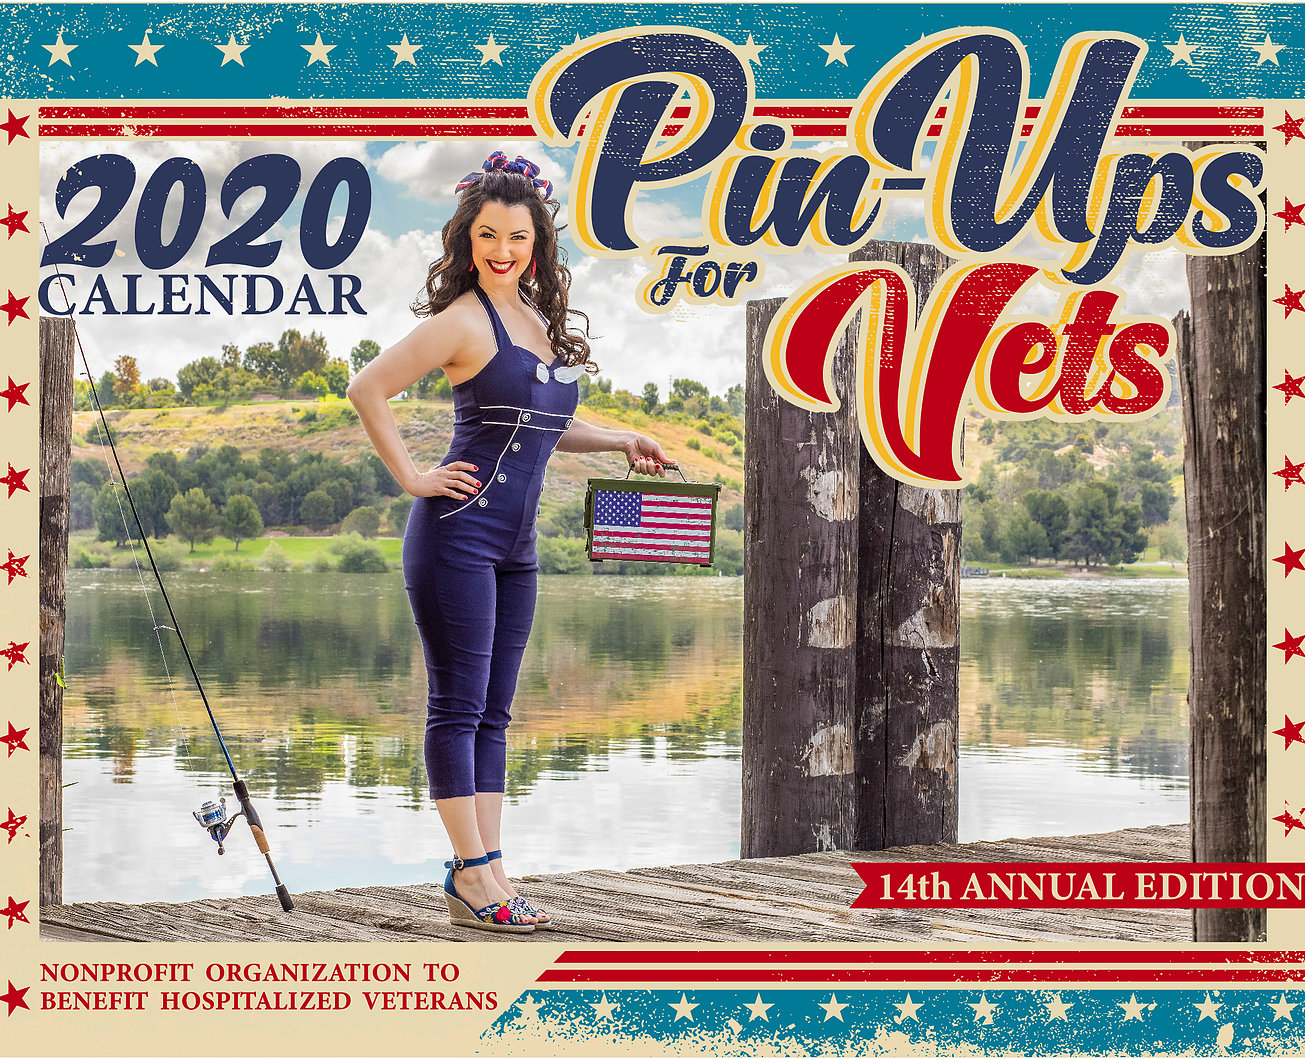 Go to the Pinups For Vets website.